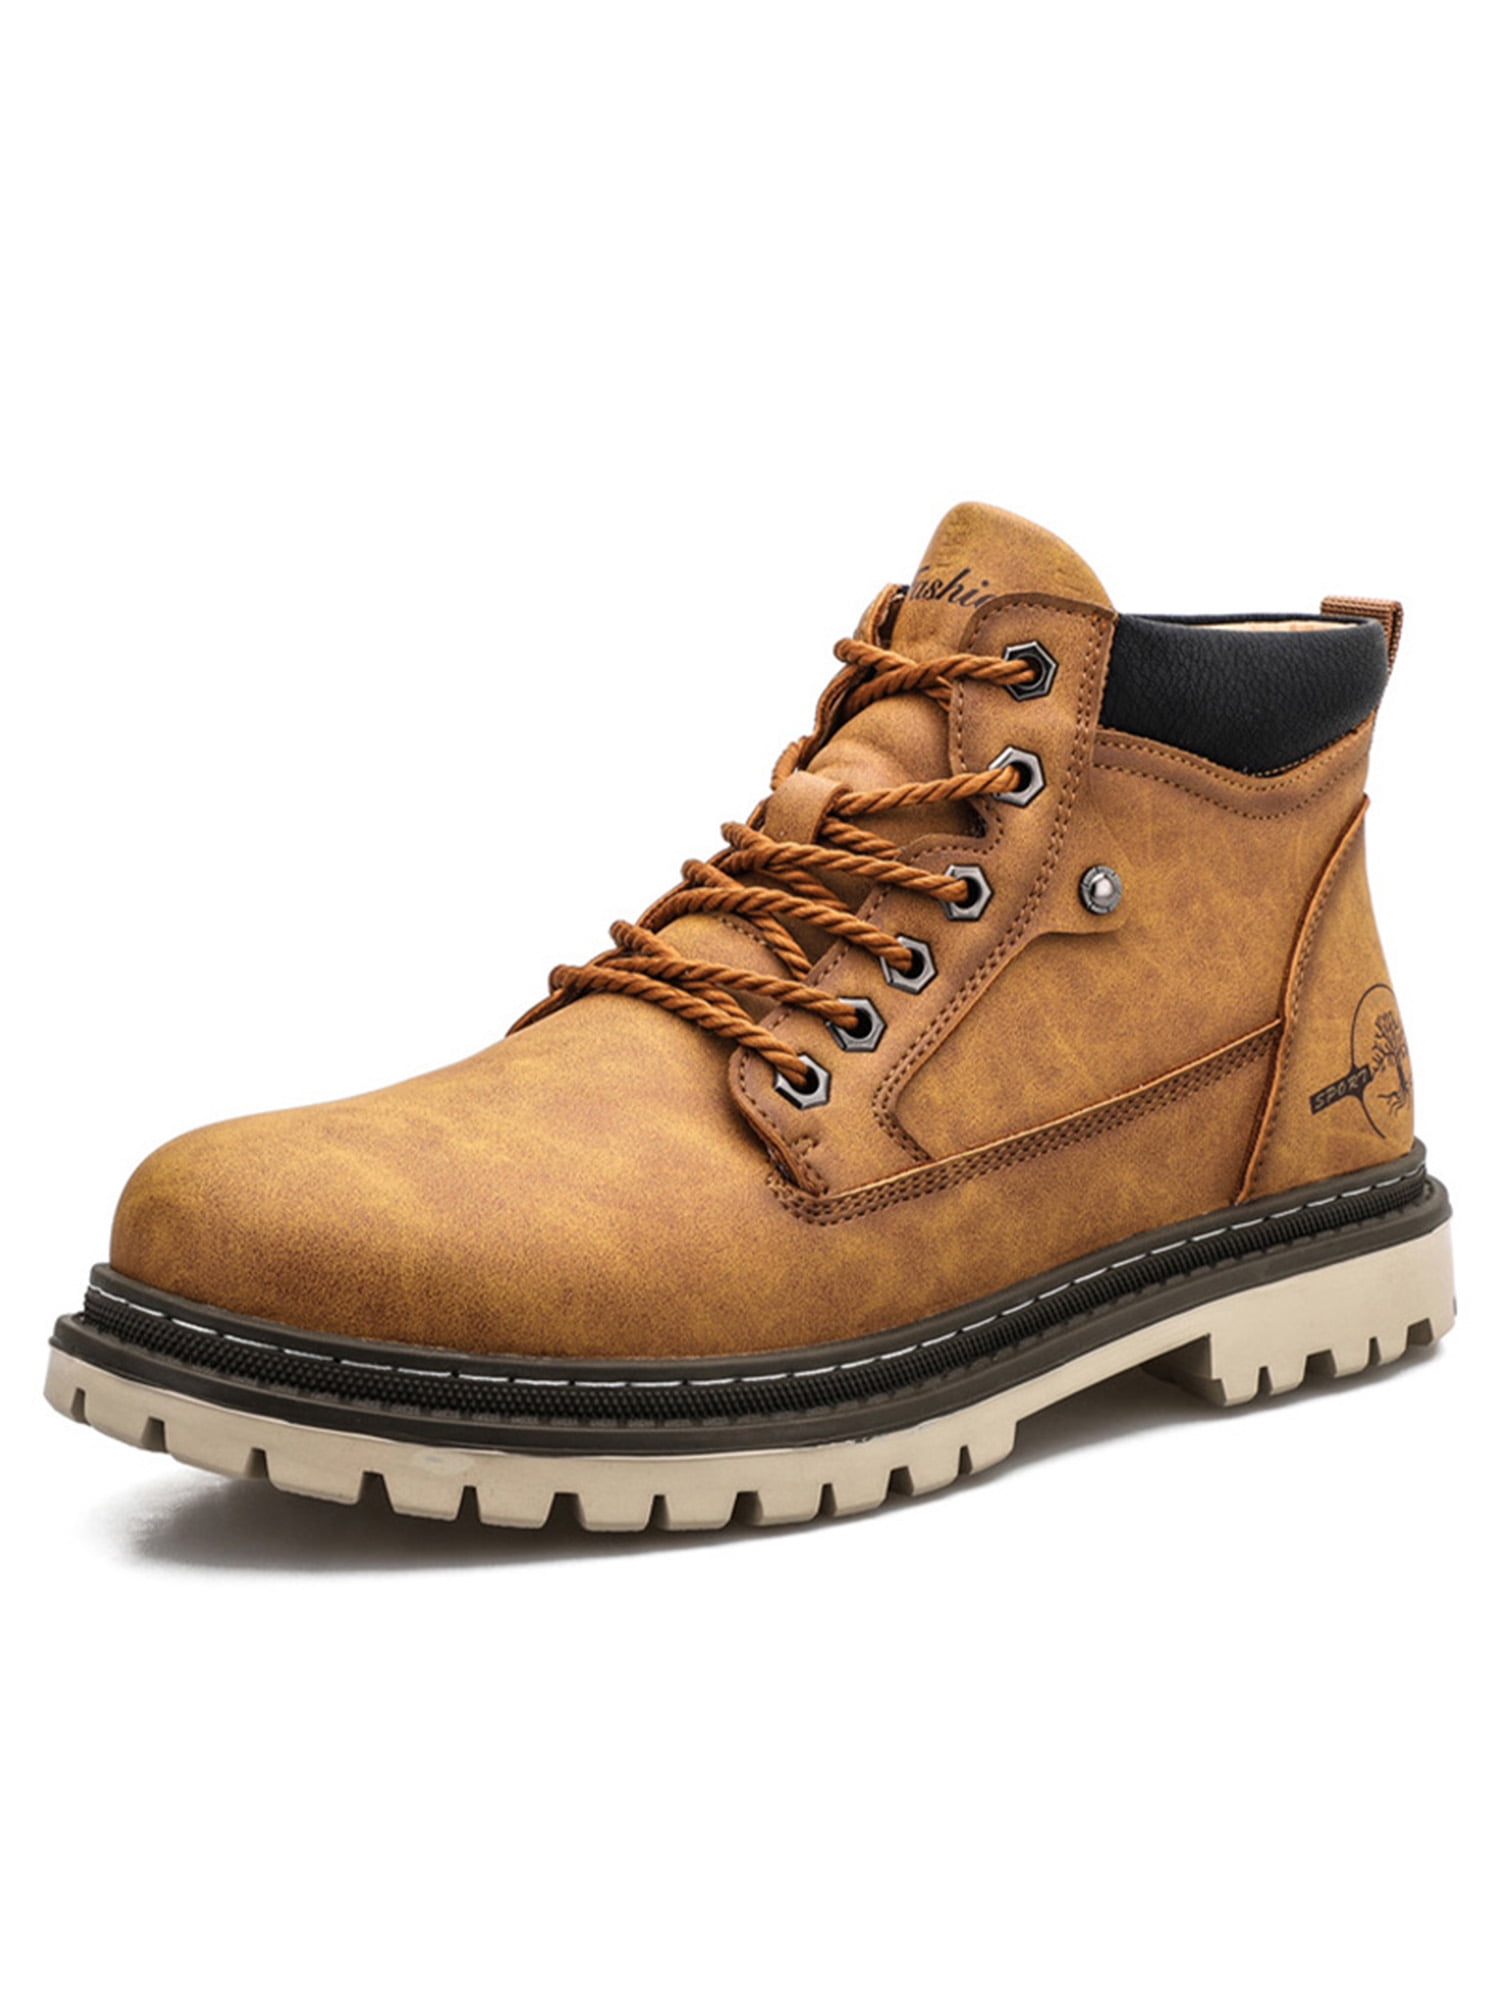 Tenmix Men Comfort Boot Walking Lace Up Leather Shoes Hiking Breathable Booties Golden 7.5 - Walmart.com